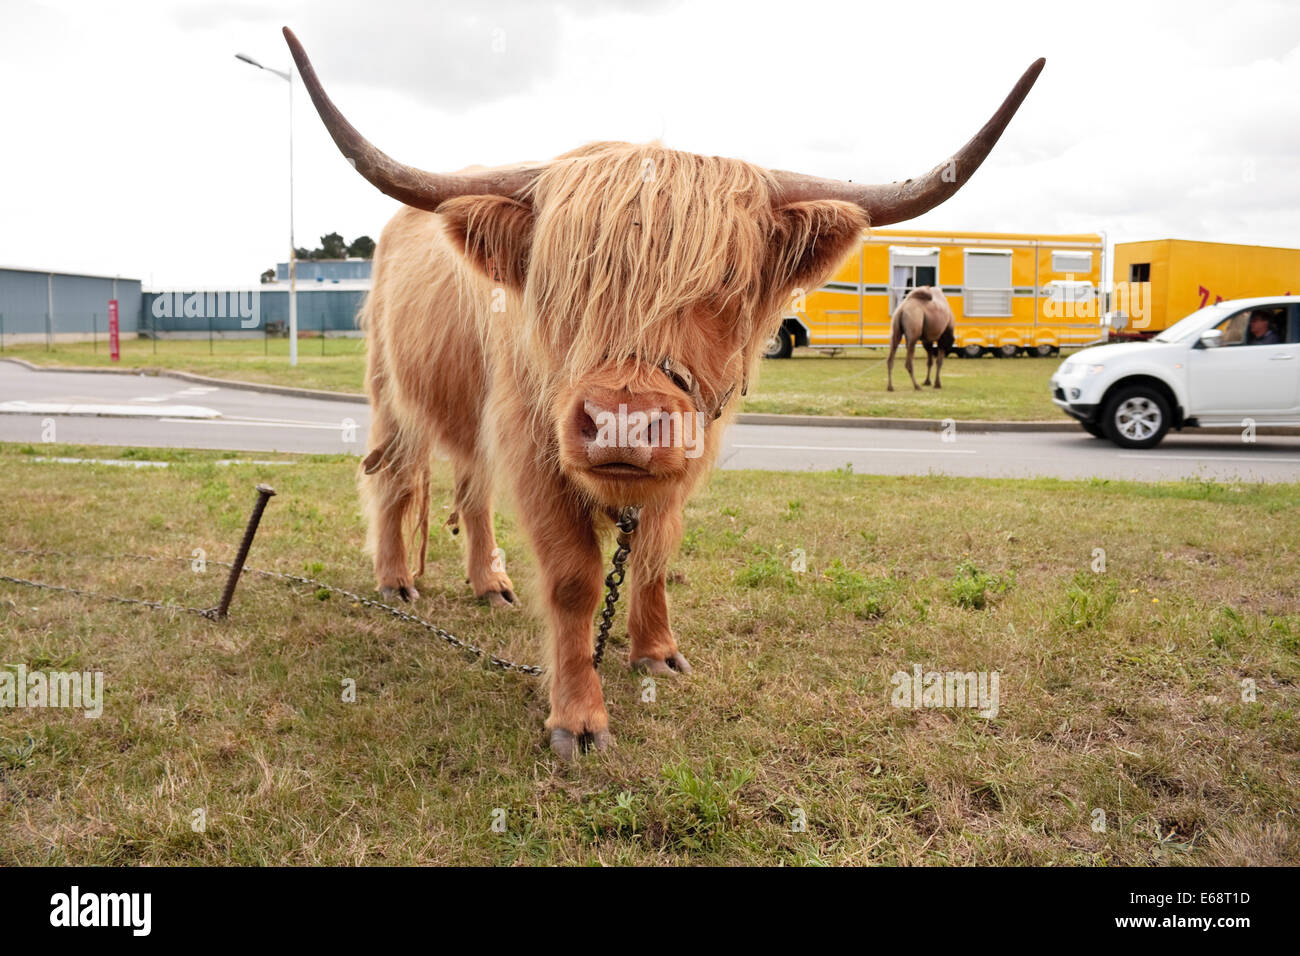 A highland red cow belonging to a travelling circus tethered at the roadside, Brittany, France Stock Photo